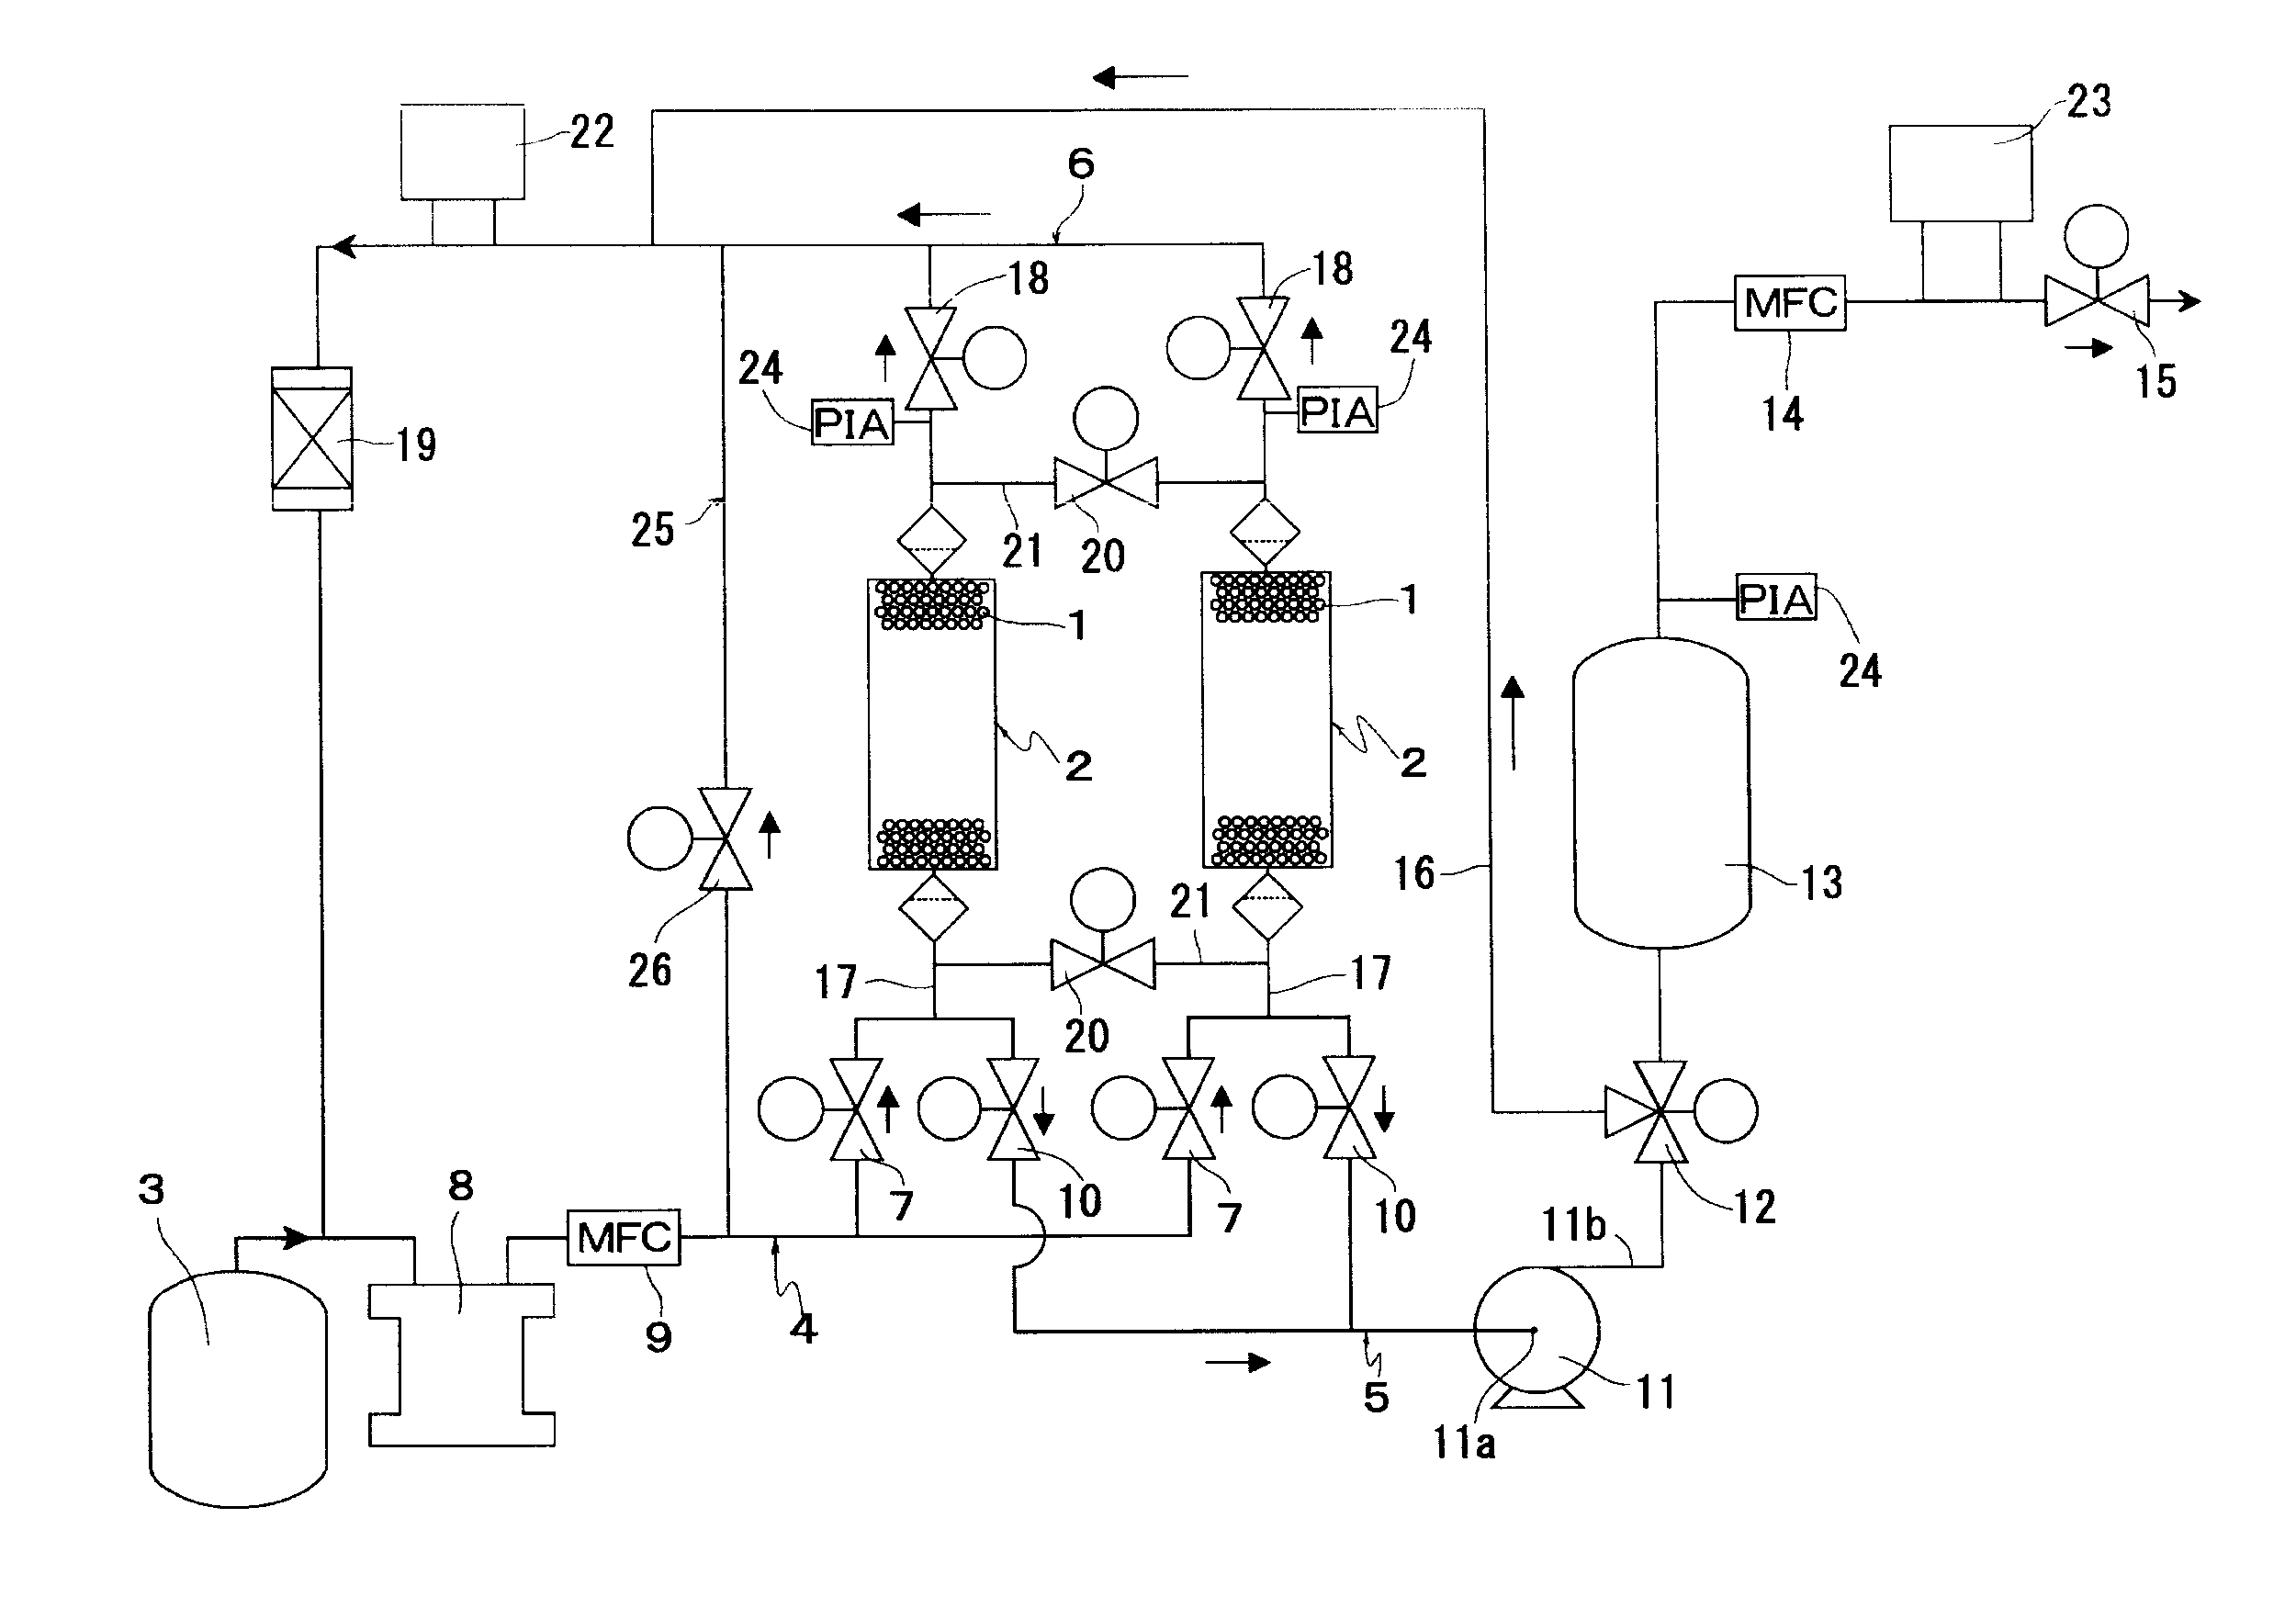 Method and apparatus for concentrating ozone gas